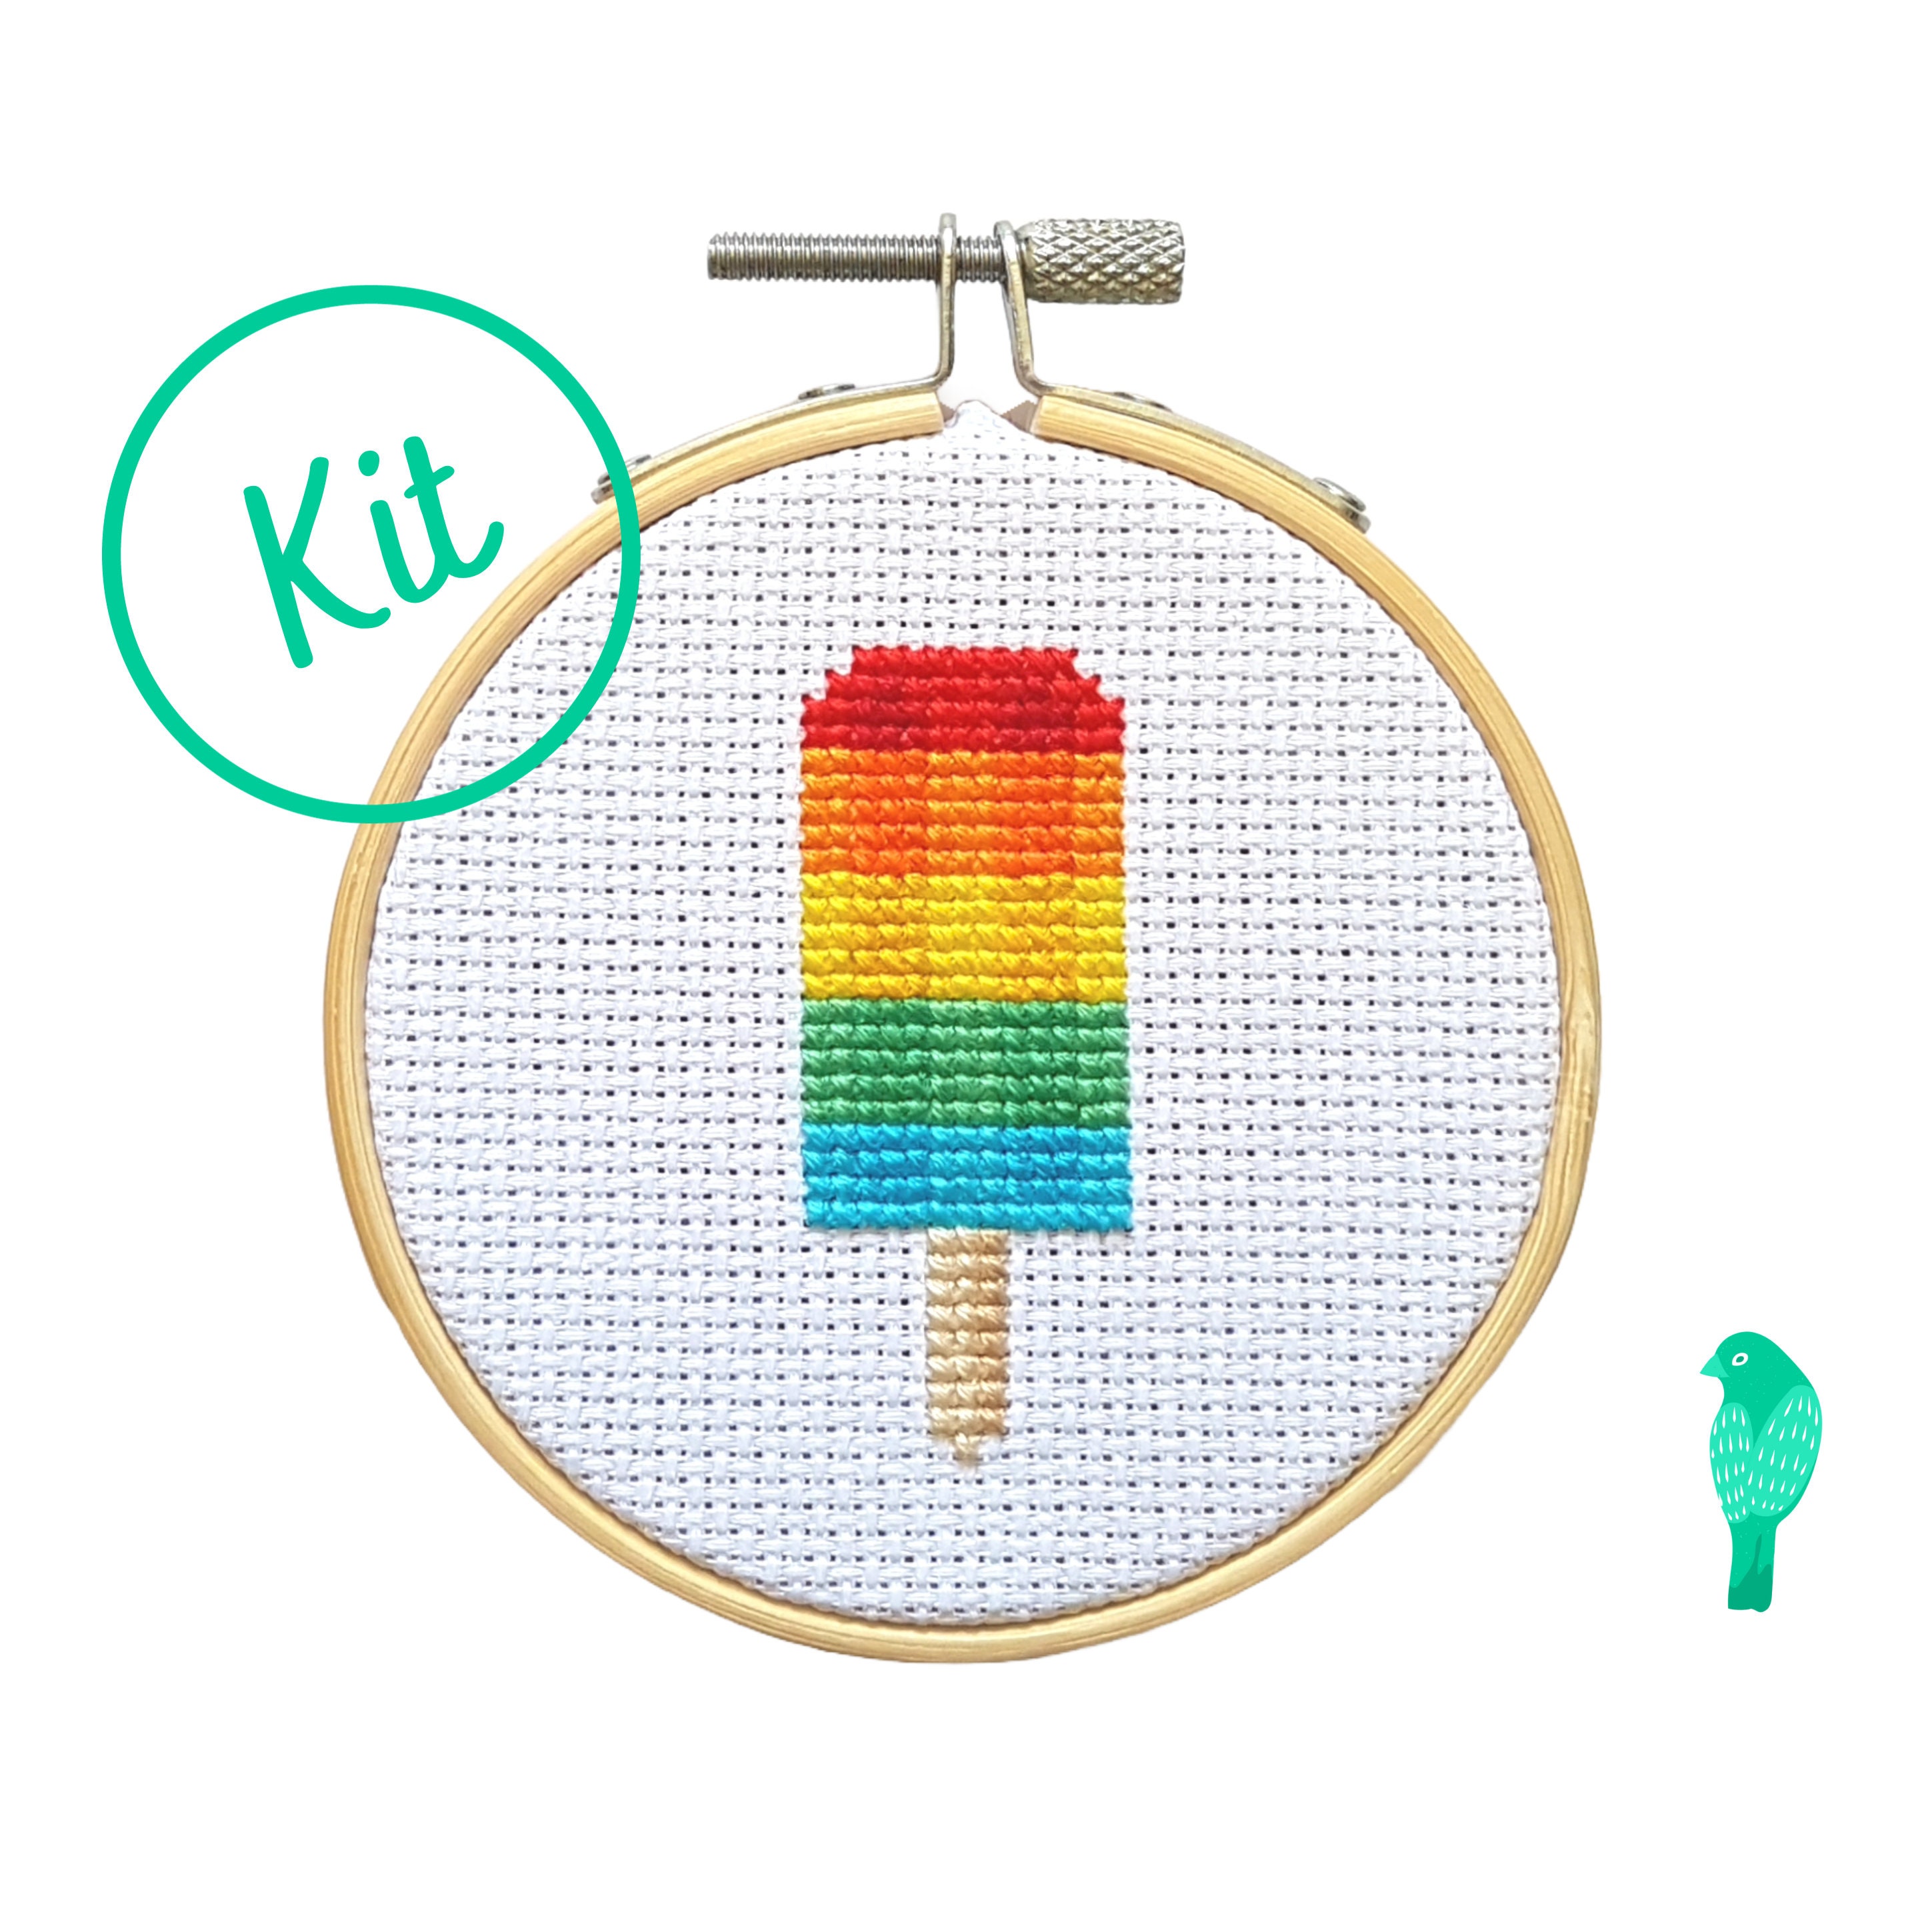 Buy Good Value Cross Stitch Kits for Beginners Kids - Colorful